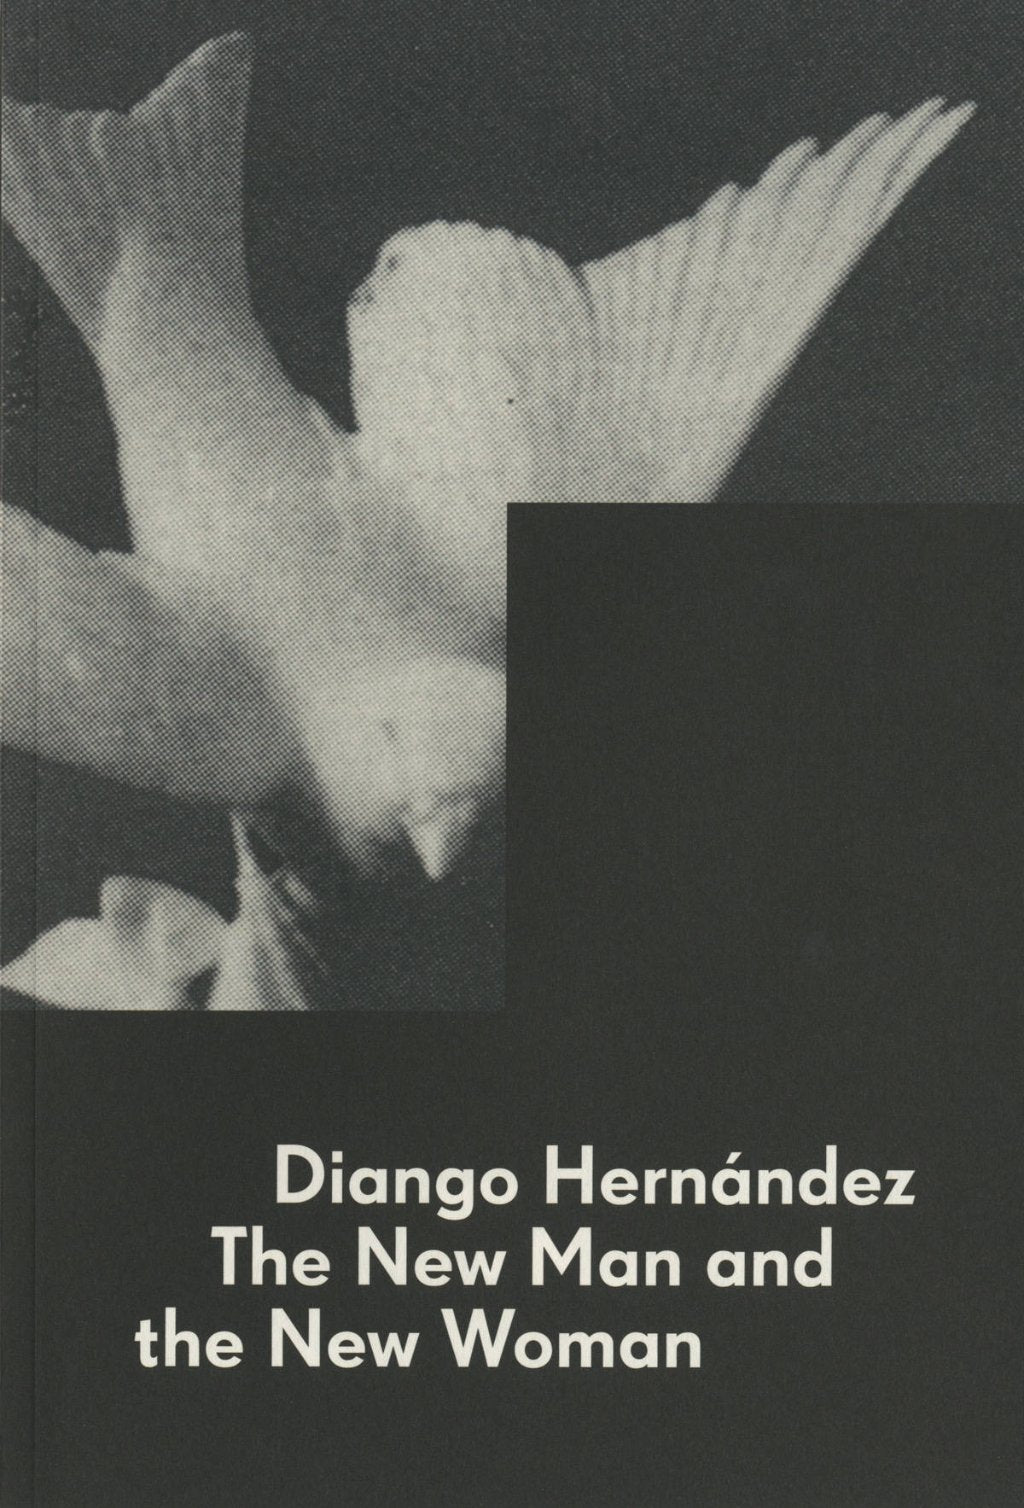 Diango Hernández. The new man and the new woman - Diango Hernandez Studio